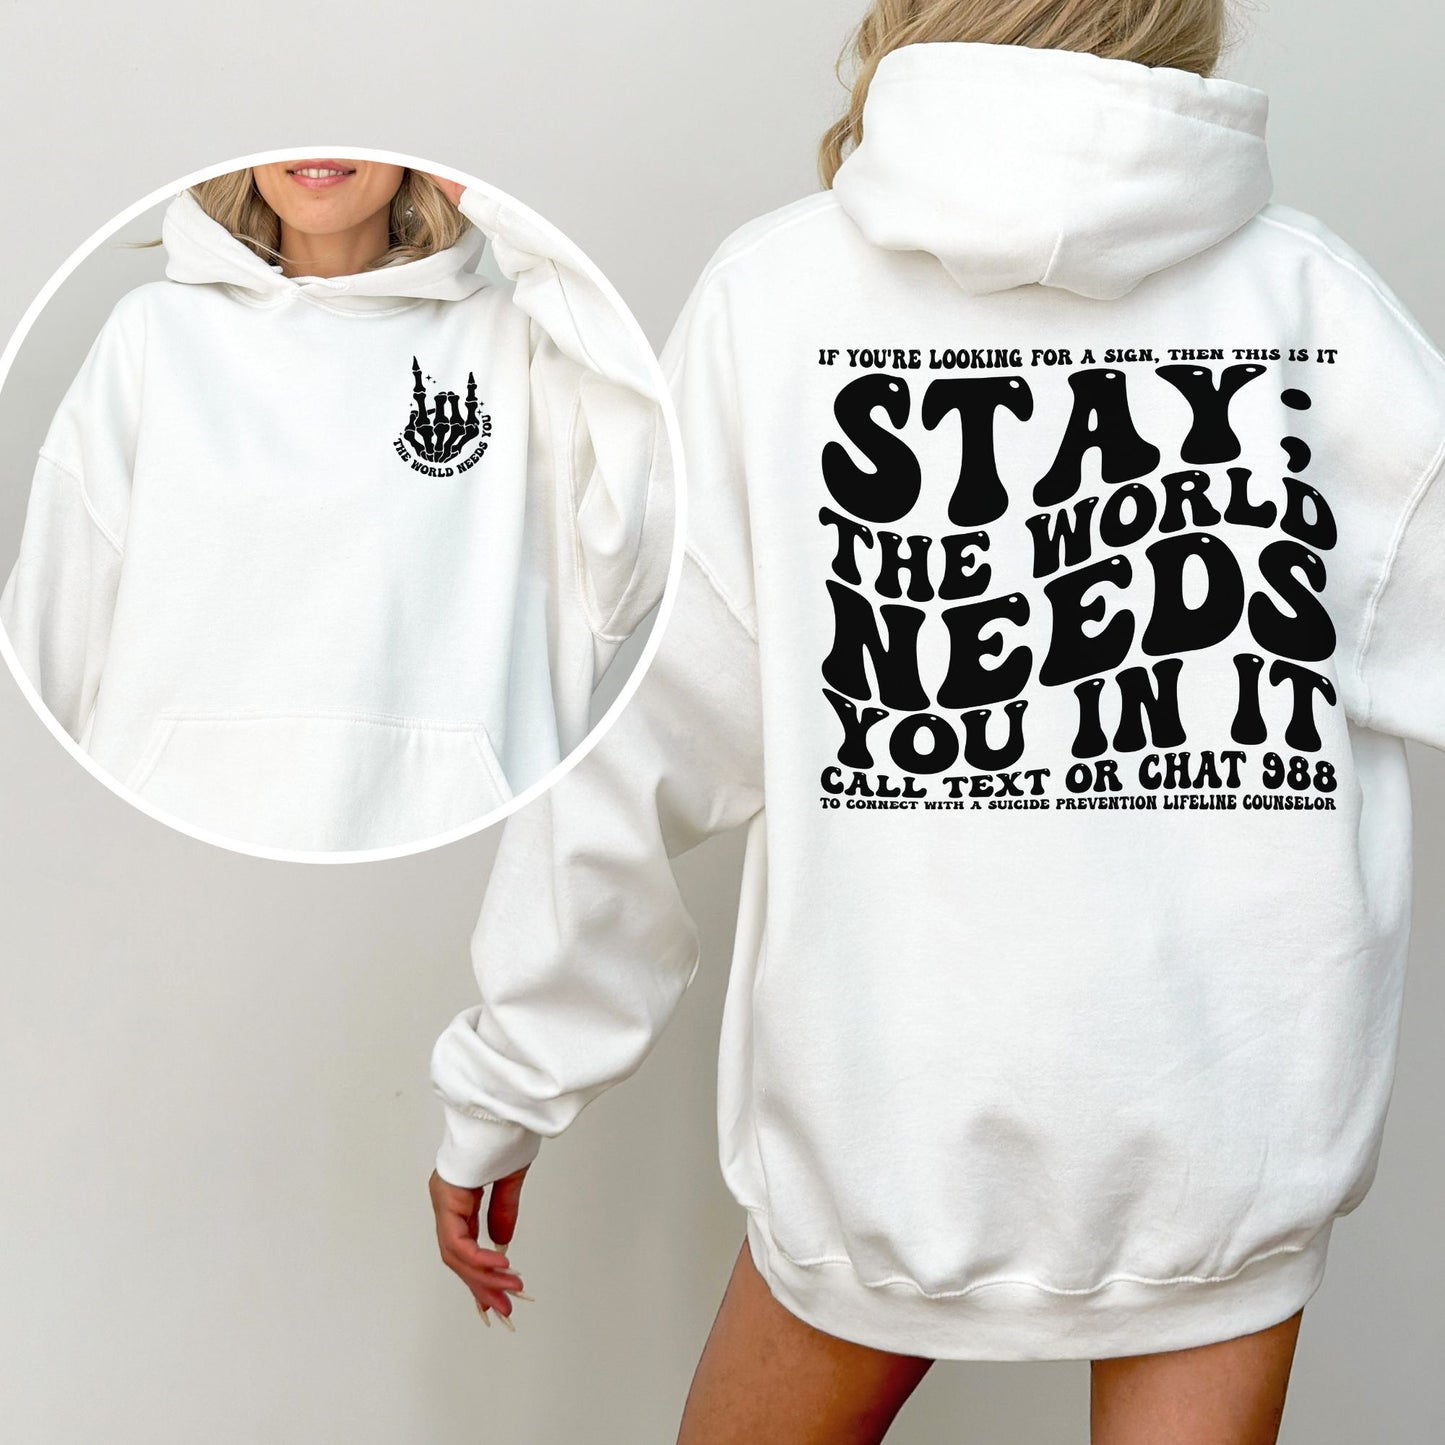 Mental Health Hoodie, Suicide Prevention, Stay, The World Needs you